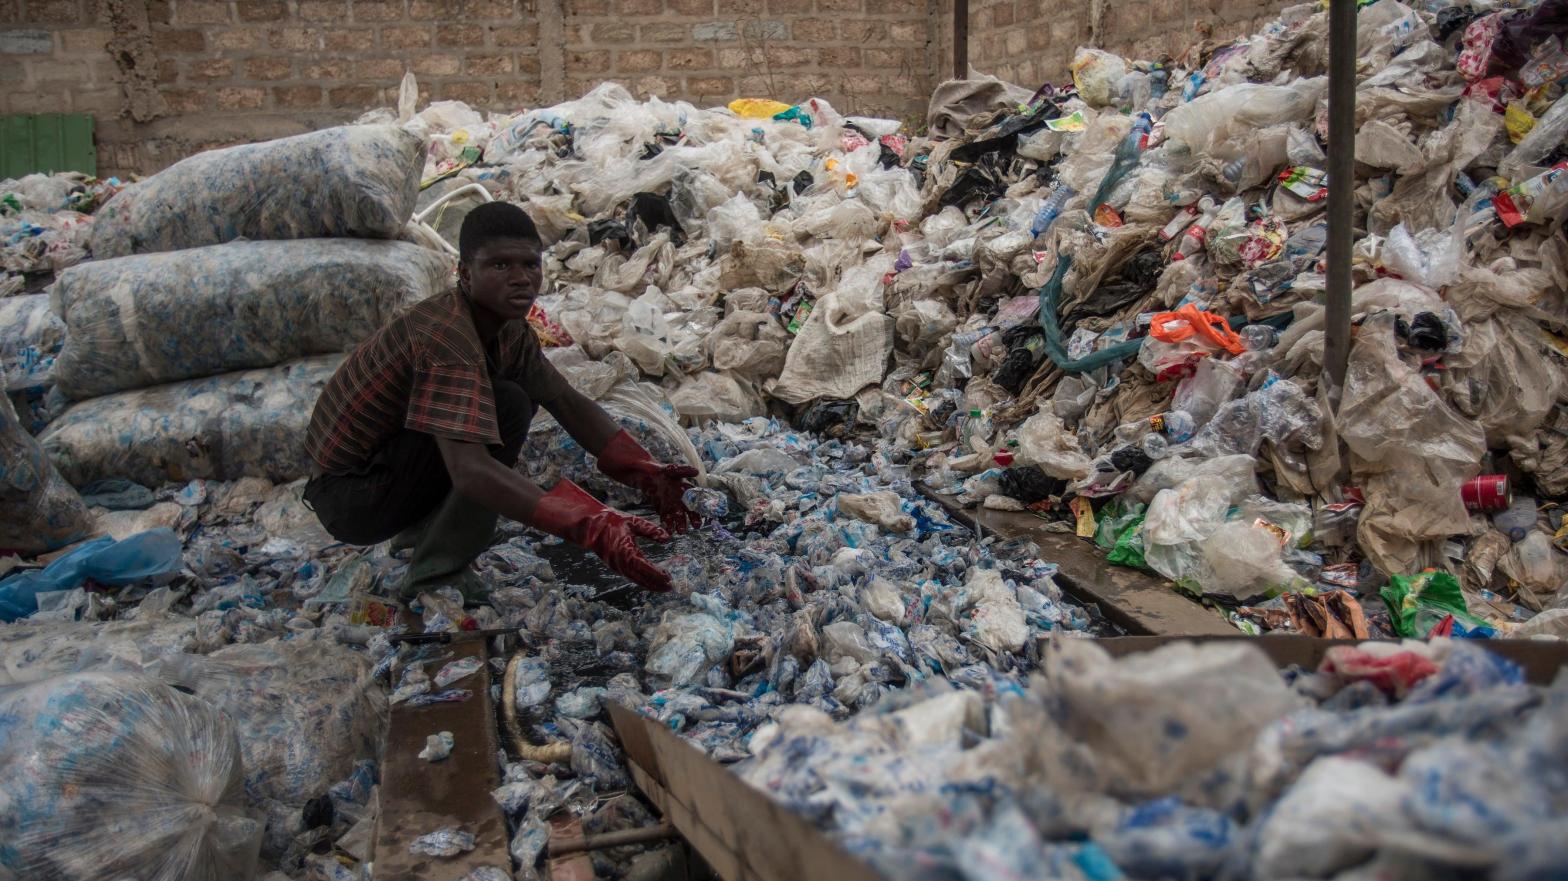 A worker in Accra sorts plastic for recycling. (Photo: Cristina Aldehuela/AFP, Getty Images)